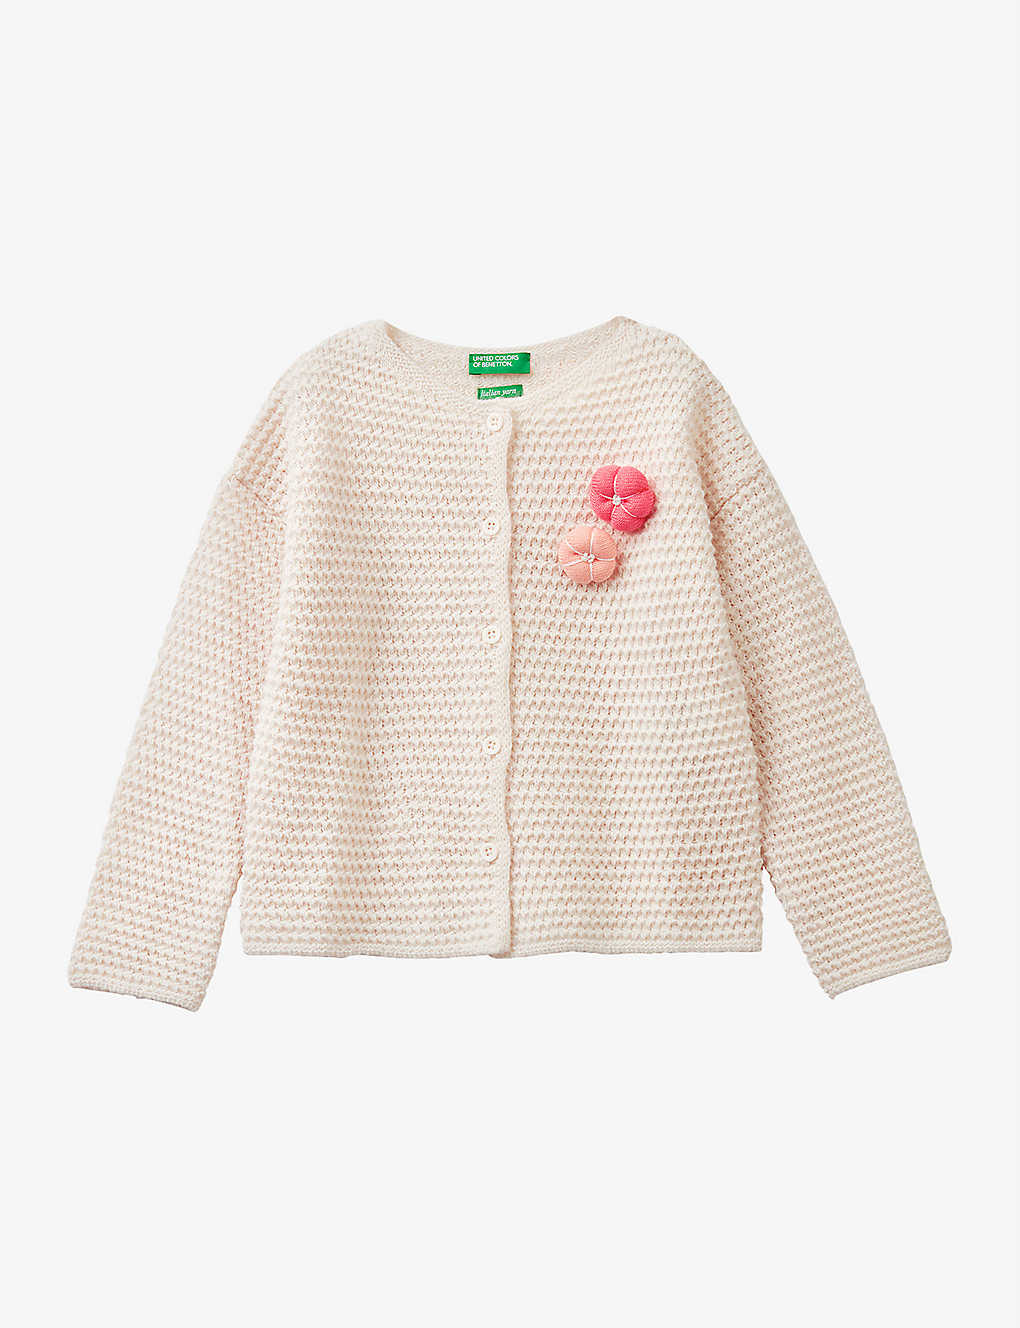 Benetton Girls White Kids Floral-appliqué Knitted Cardigan 1-6 Years